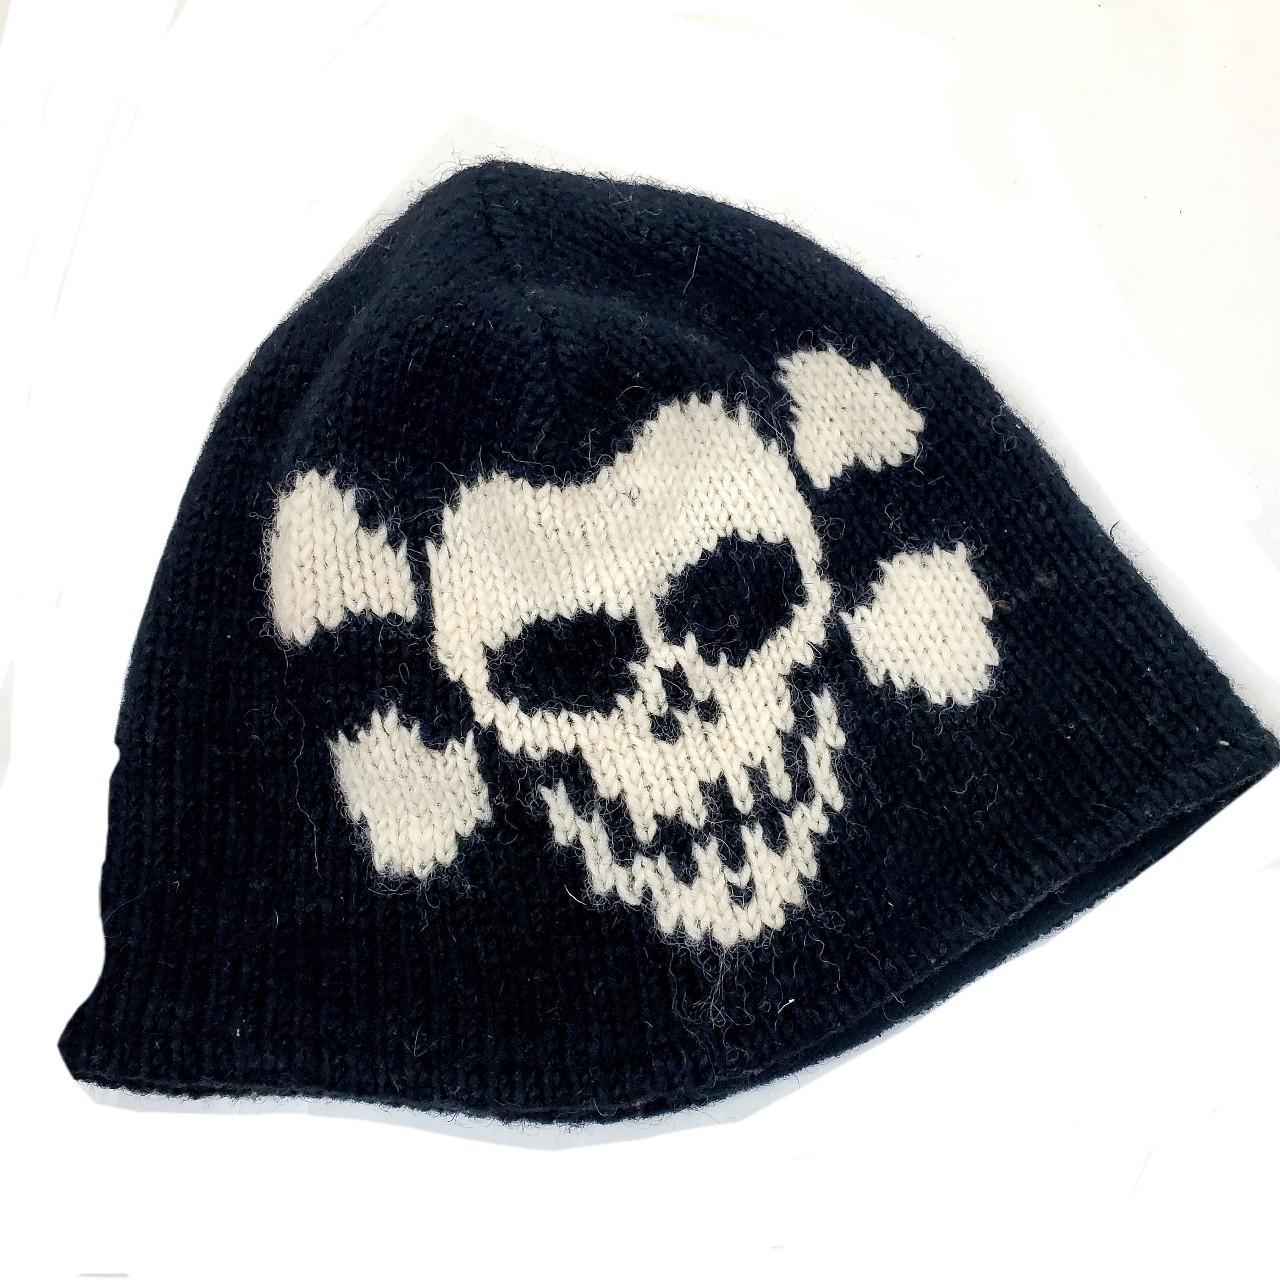 Product Image 1 - Skull mall goth beanie. 

Pair